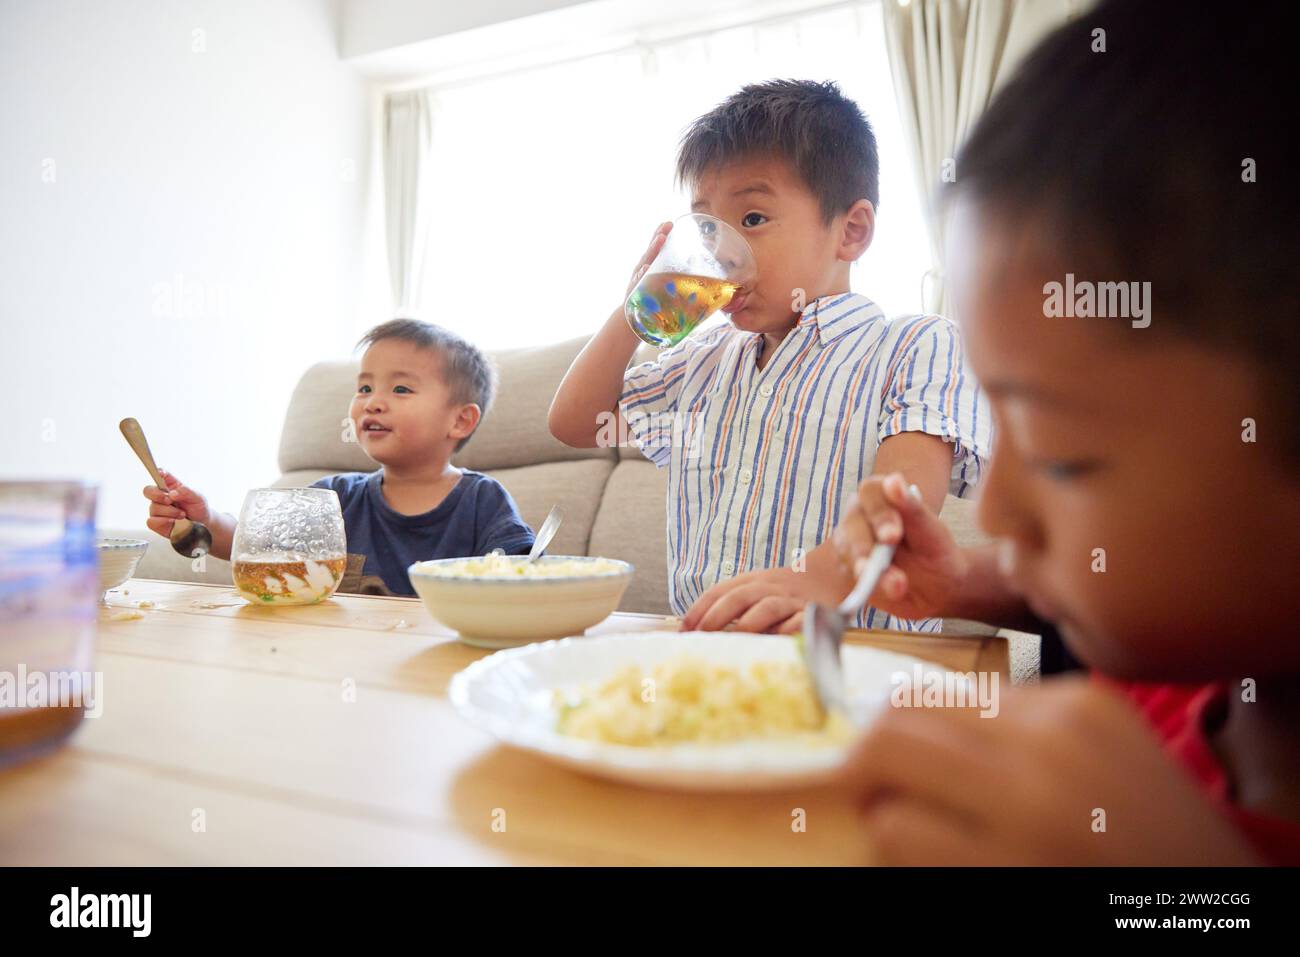 Three children eating food at a table Stock Photo